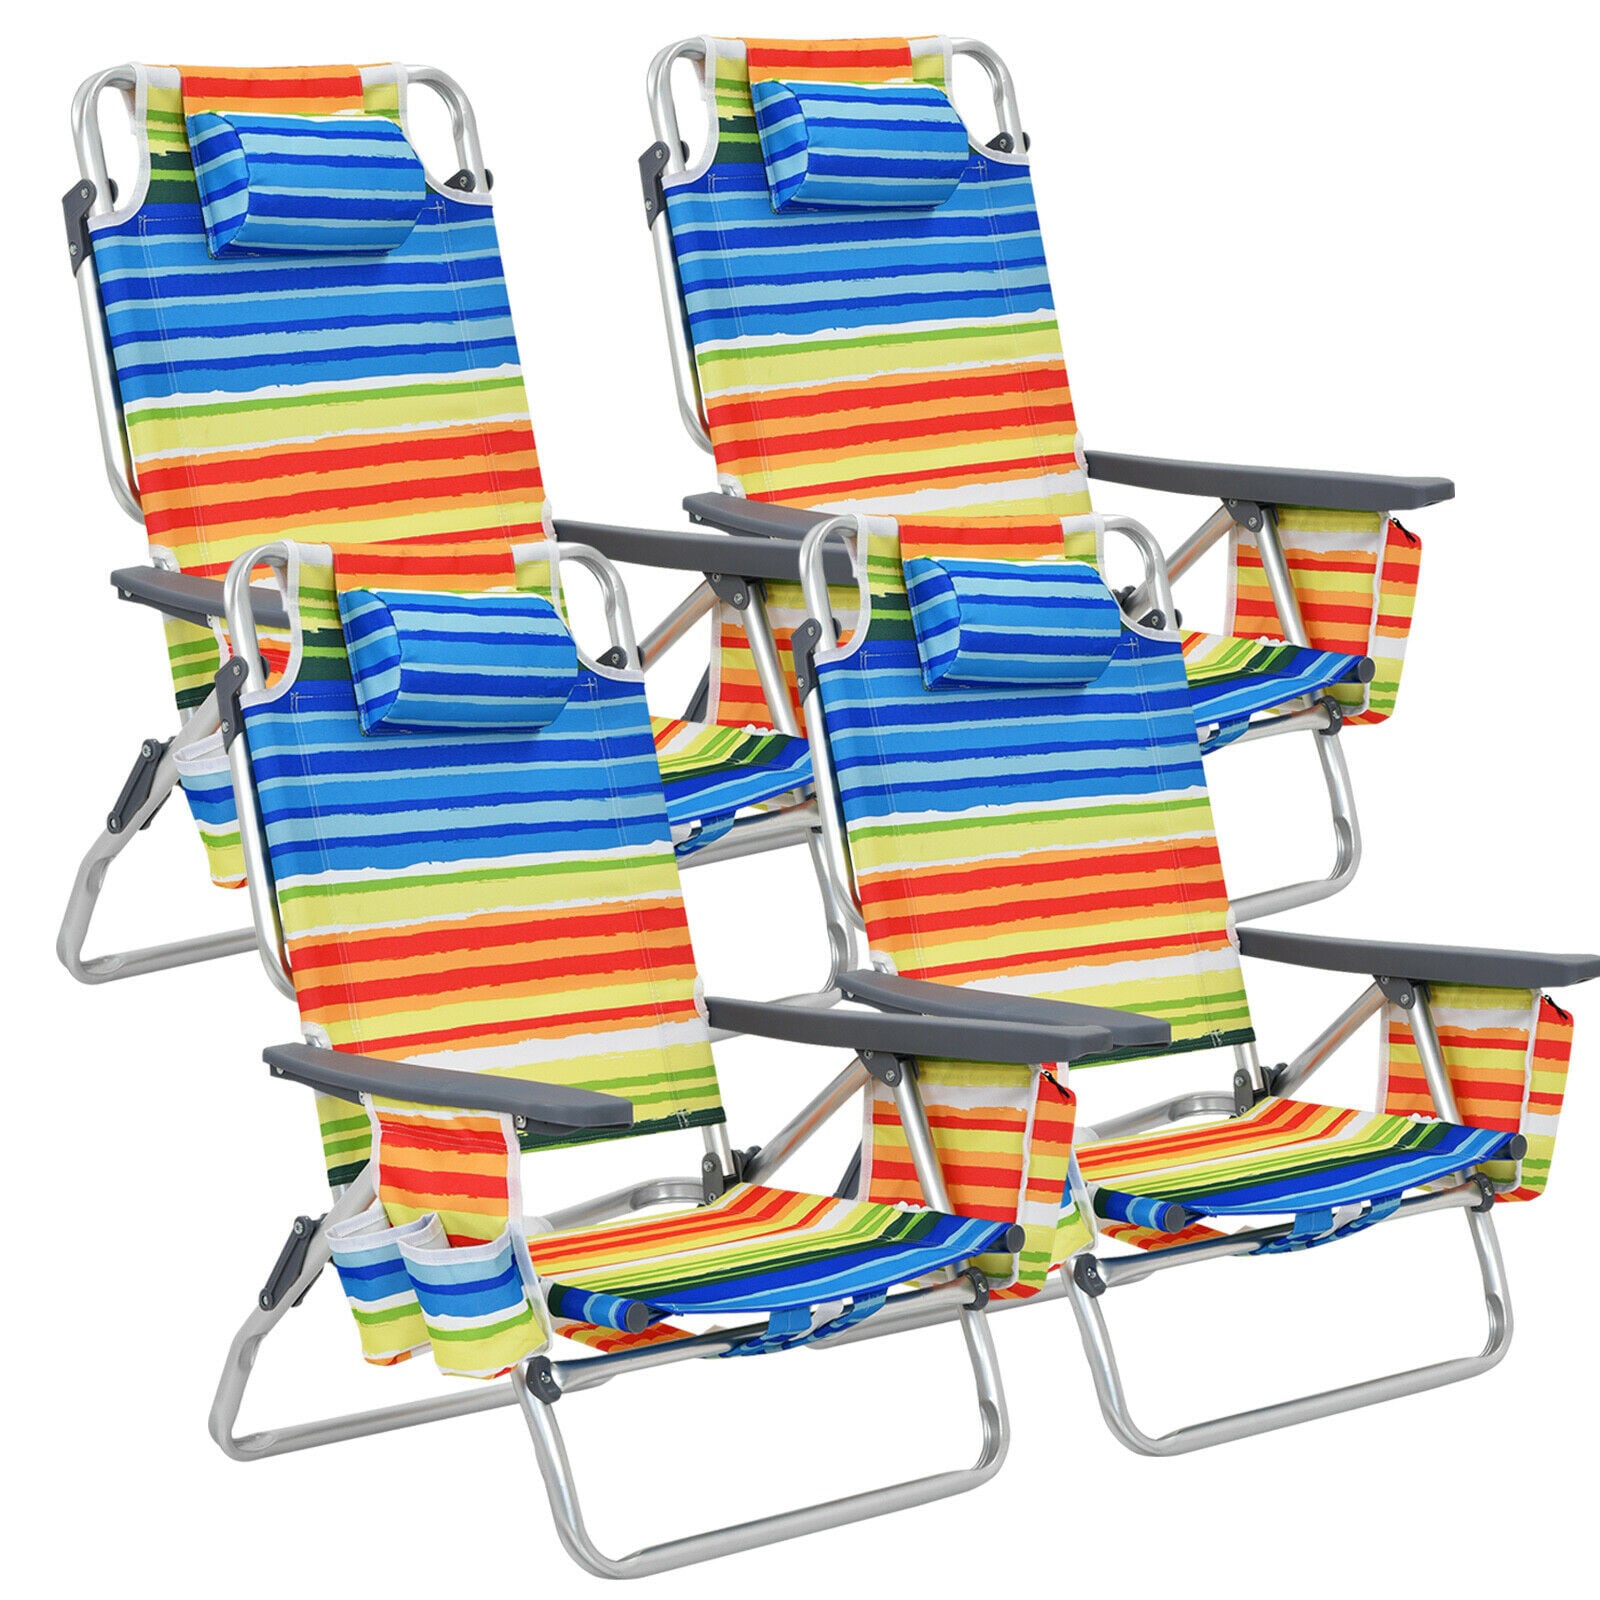 WELLFOR PVC Olefin Yellow Folding Beach Chair (Adjustable) in the